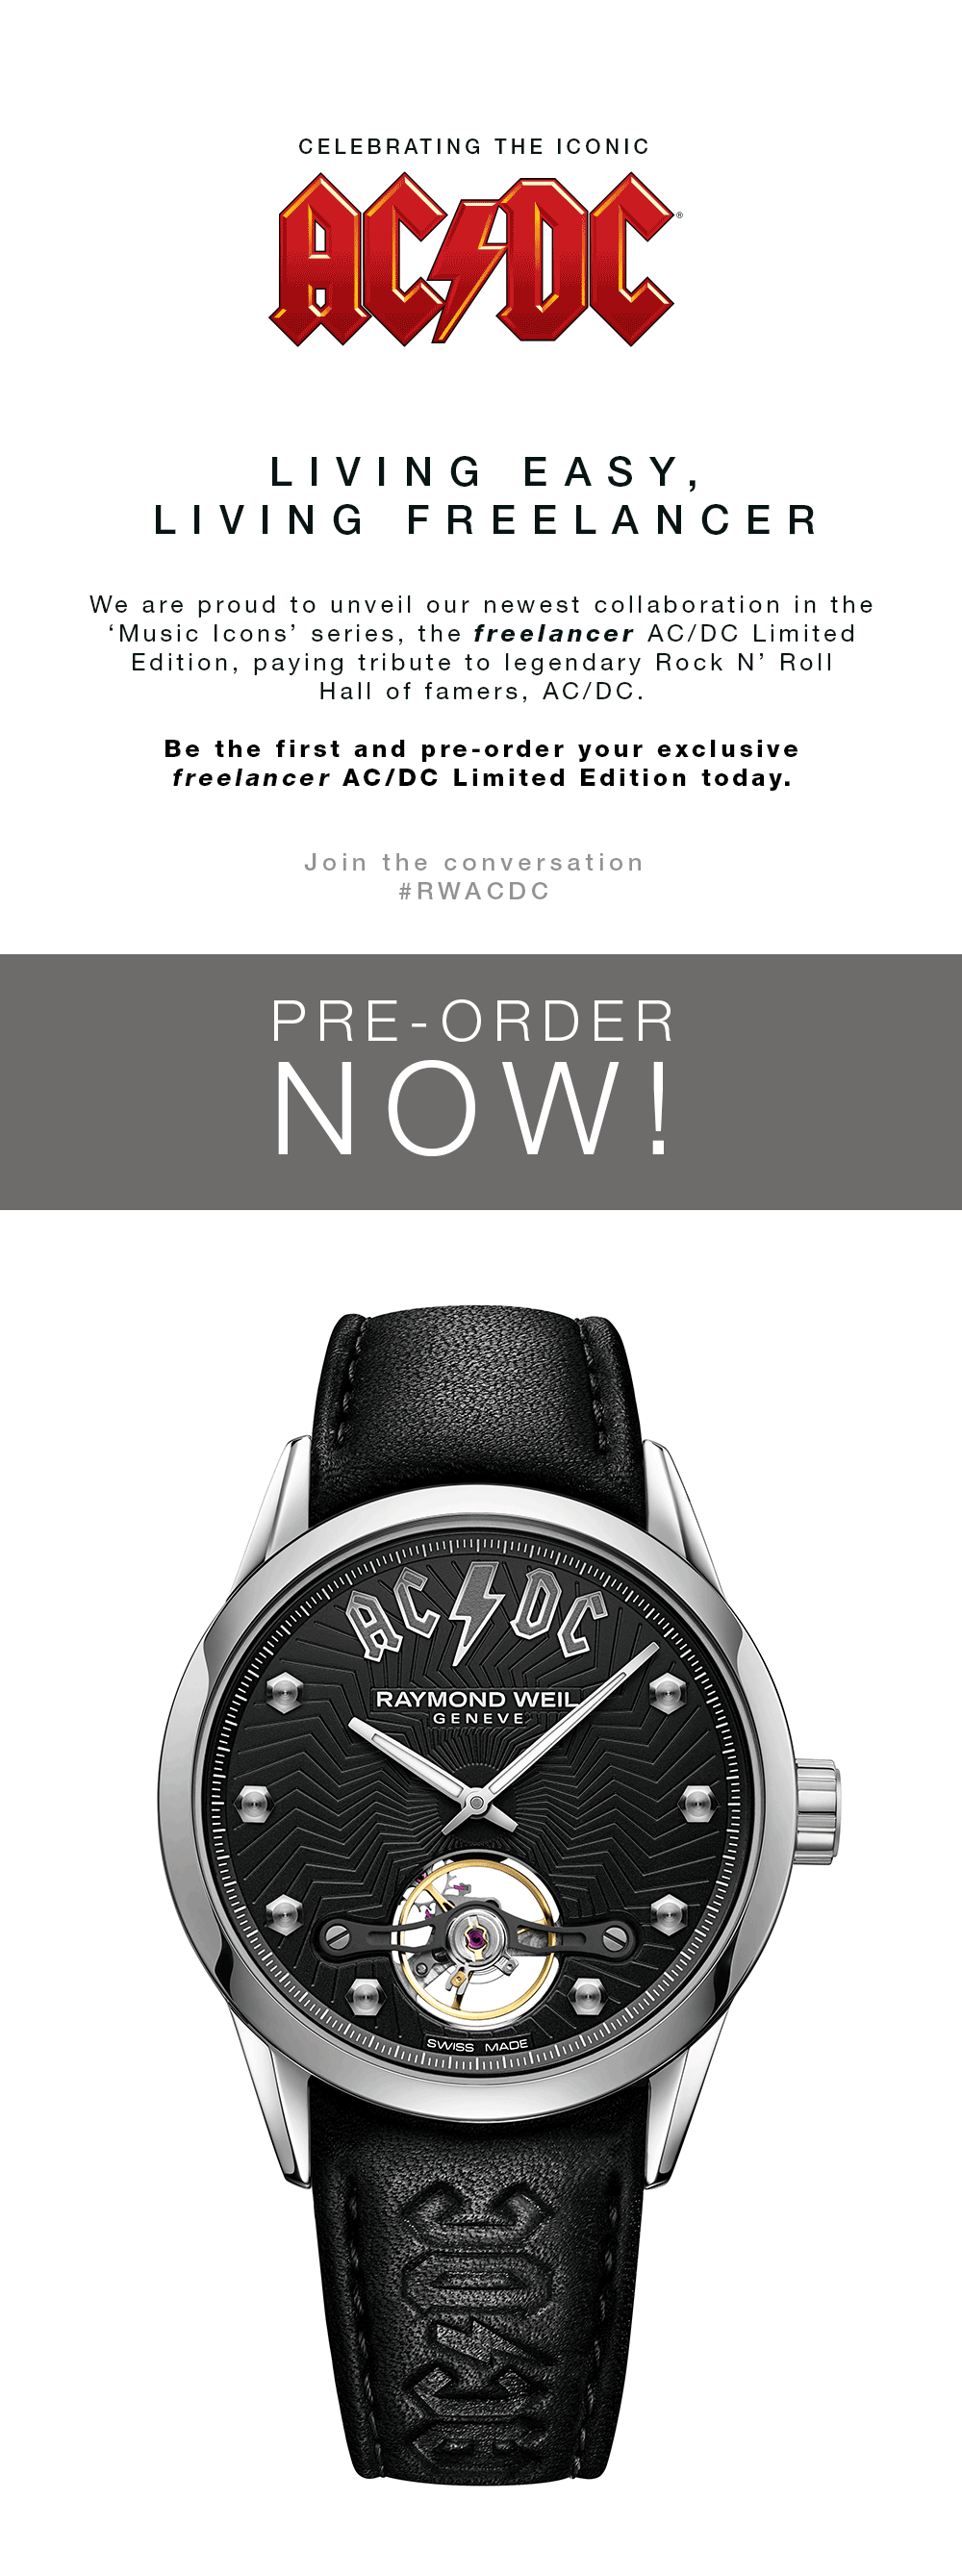 Raymond Weil: Introducing the New Freelancer AC/DC Limited Edition 